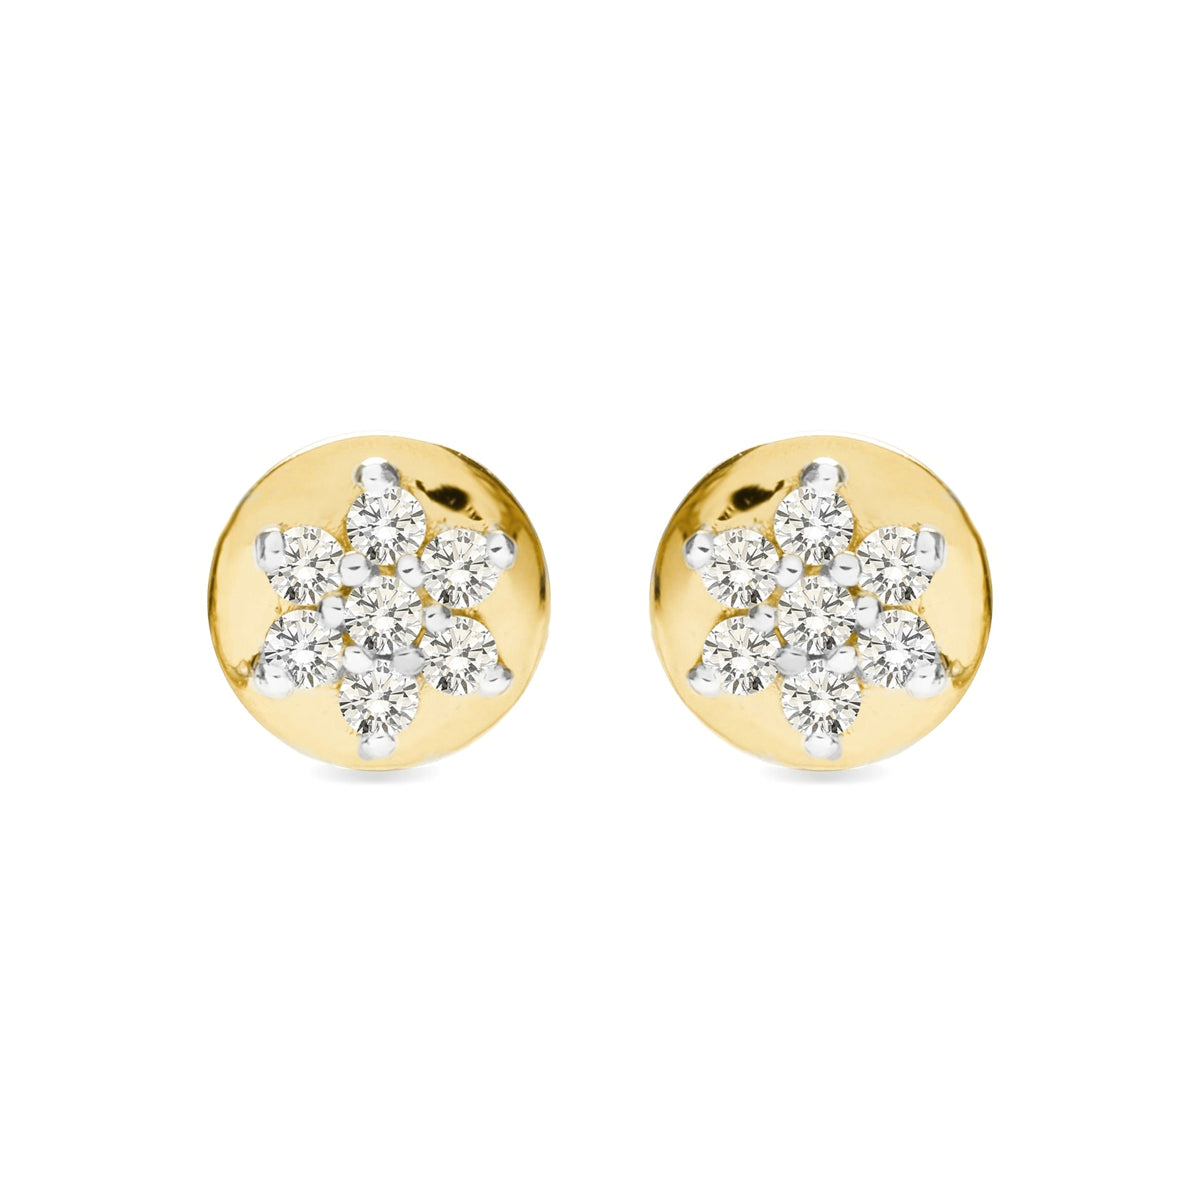 Boucles d'oreilles Laylay en or sterling 18 carats